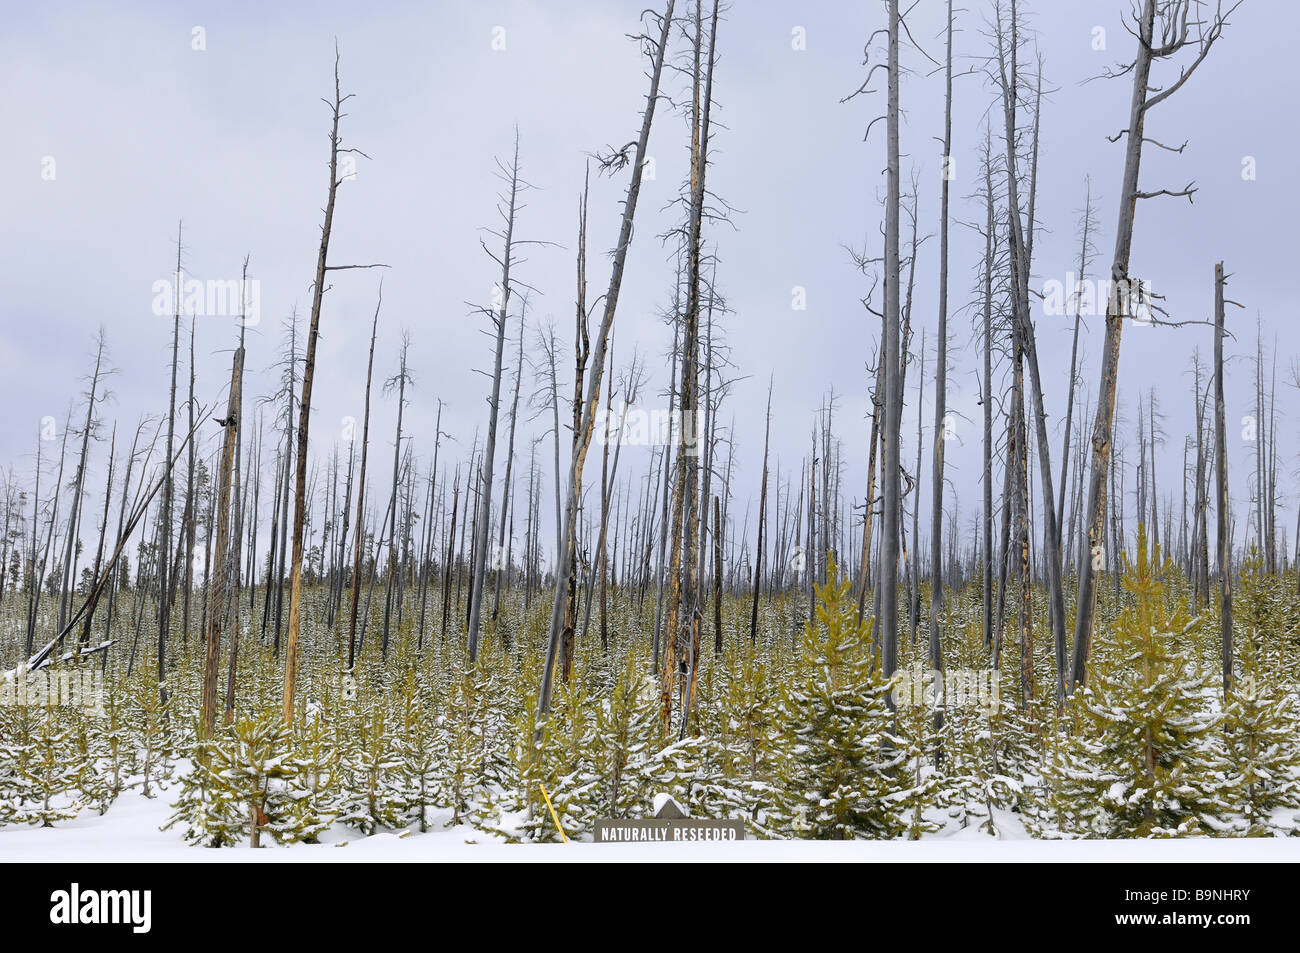 Naturally reseeded Lodgepole Pine after 1988 burn in Yellowstone National Park in winter Stock Photo